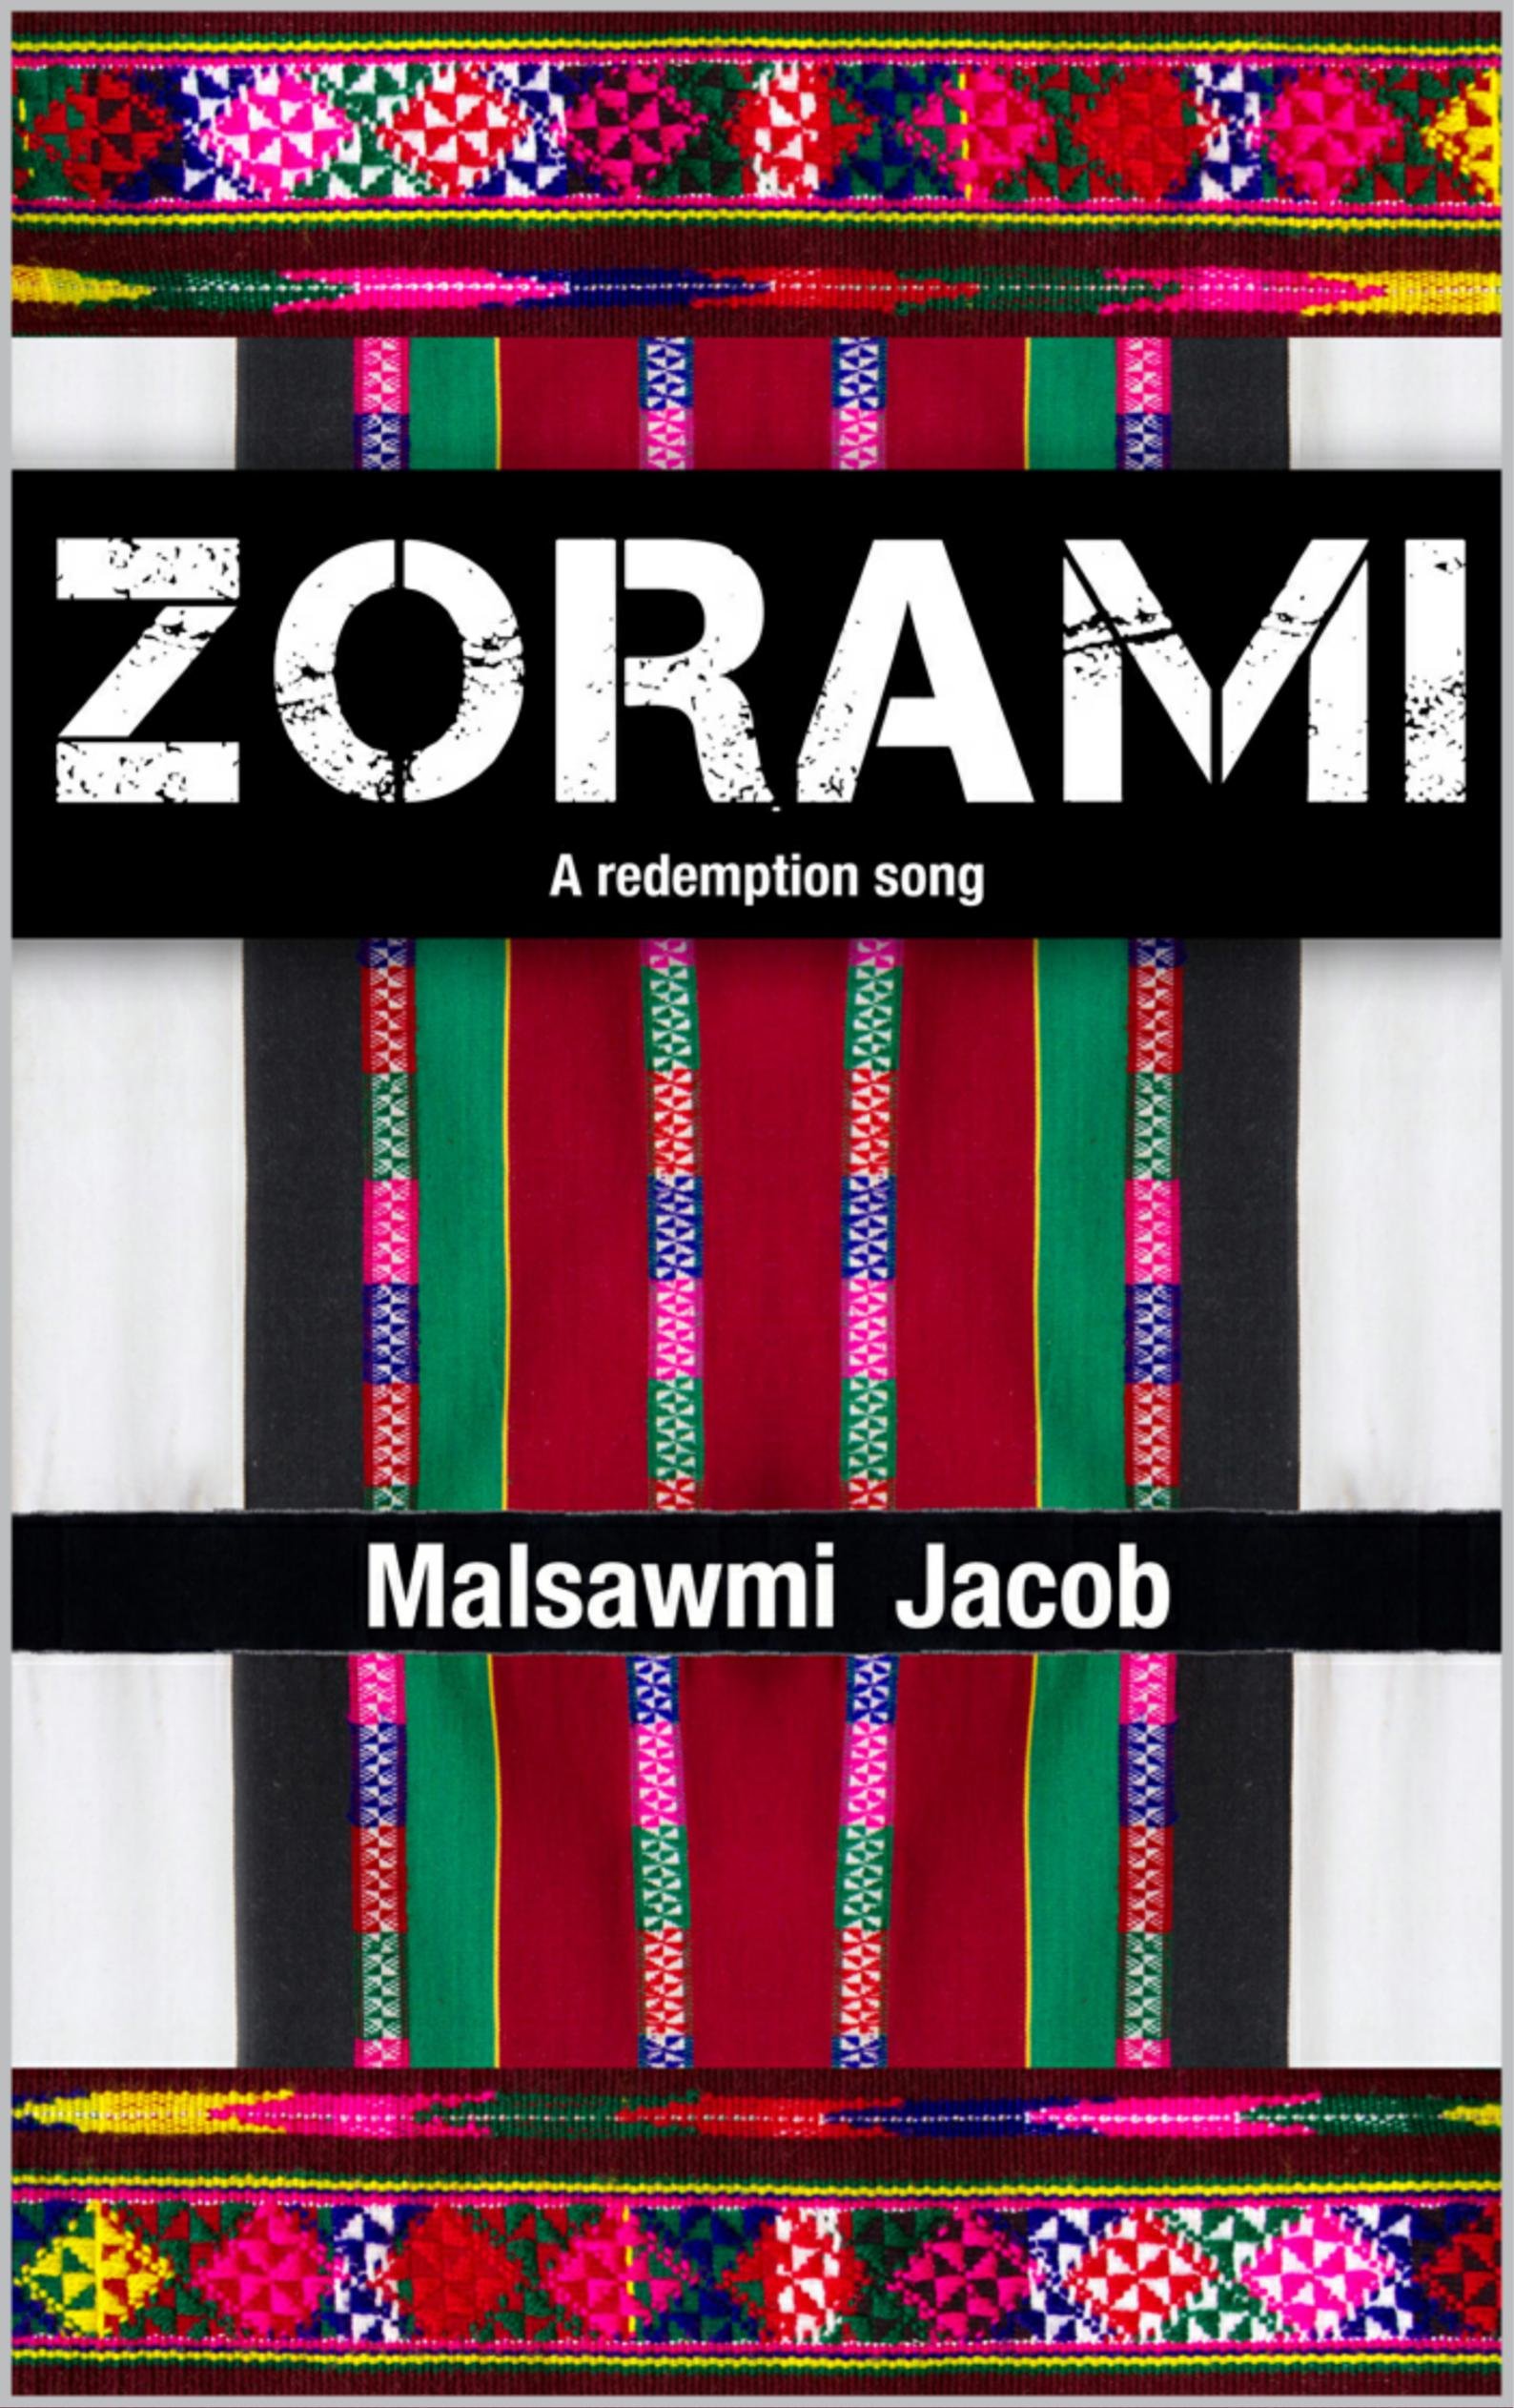  ‘Zorami’, the first ever novel written by a Mizo writer in English, draws on the Insurgency years of the Sixties in Mizoram to tell the coming of age story of Zorami, a young woman caught in conflict.